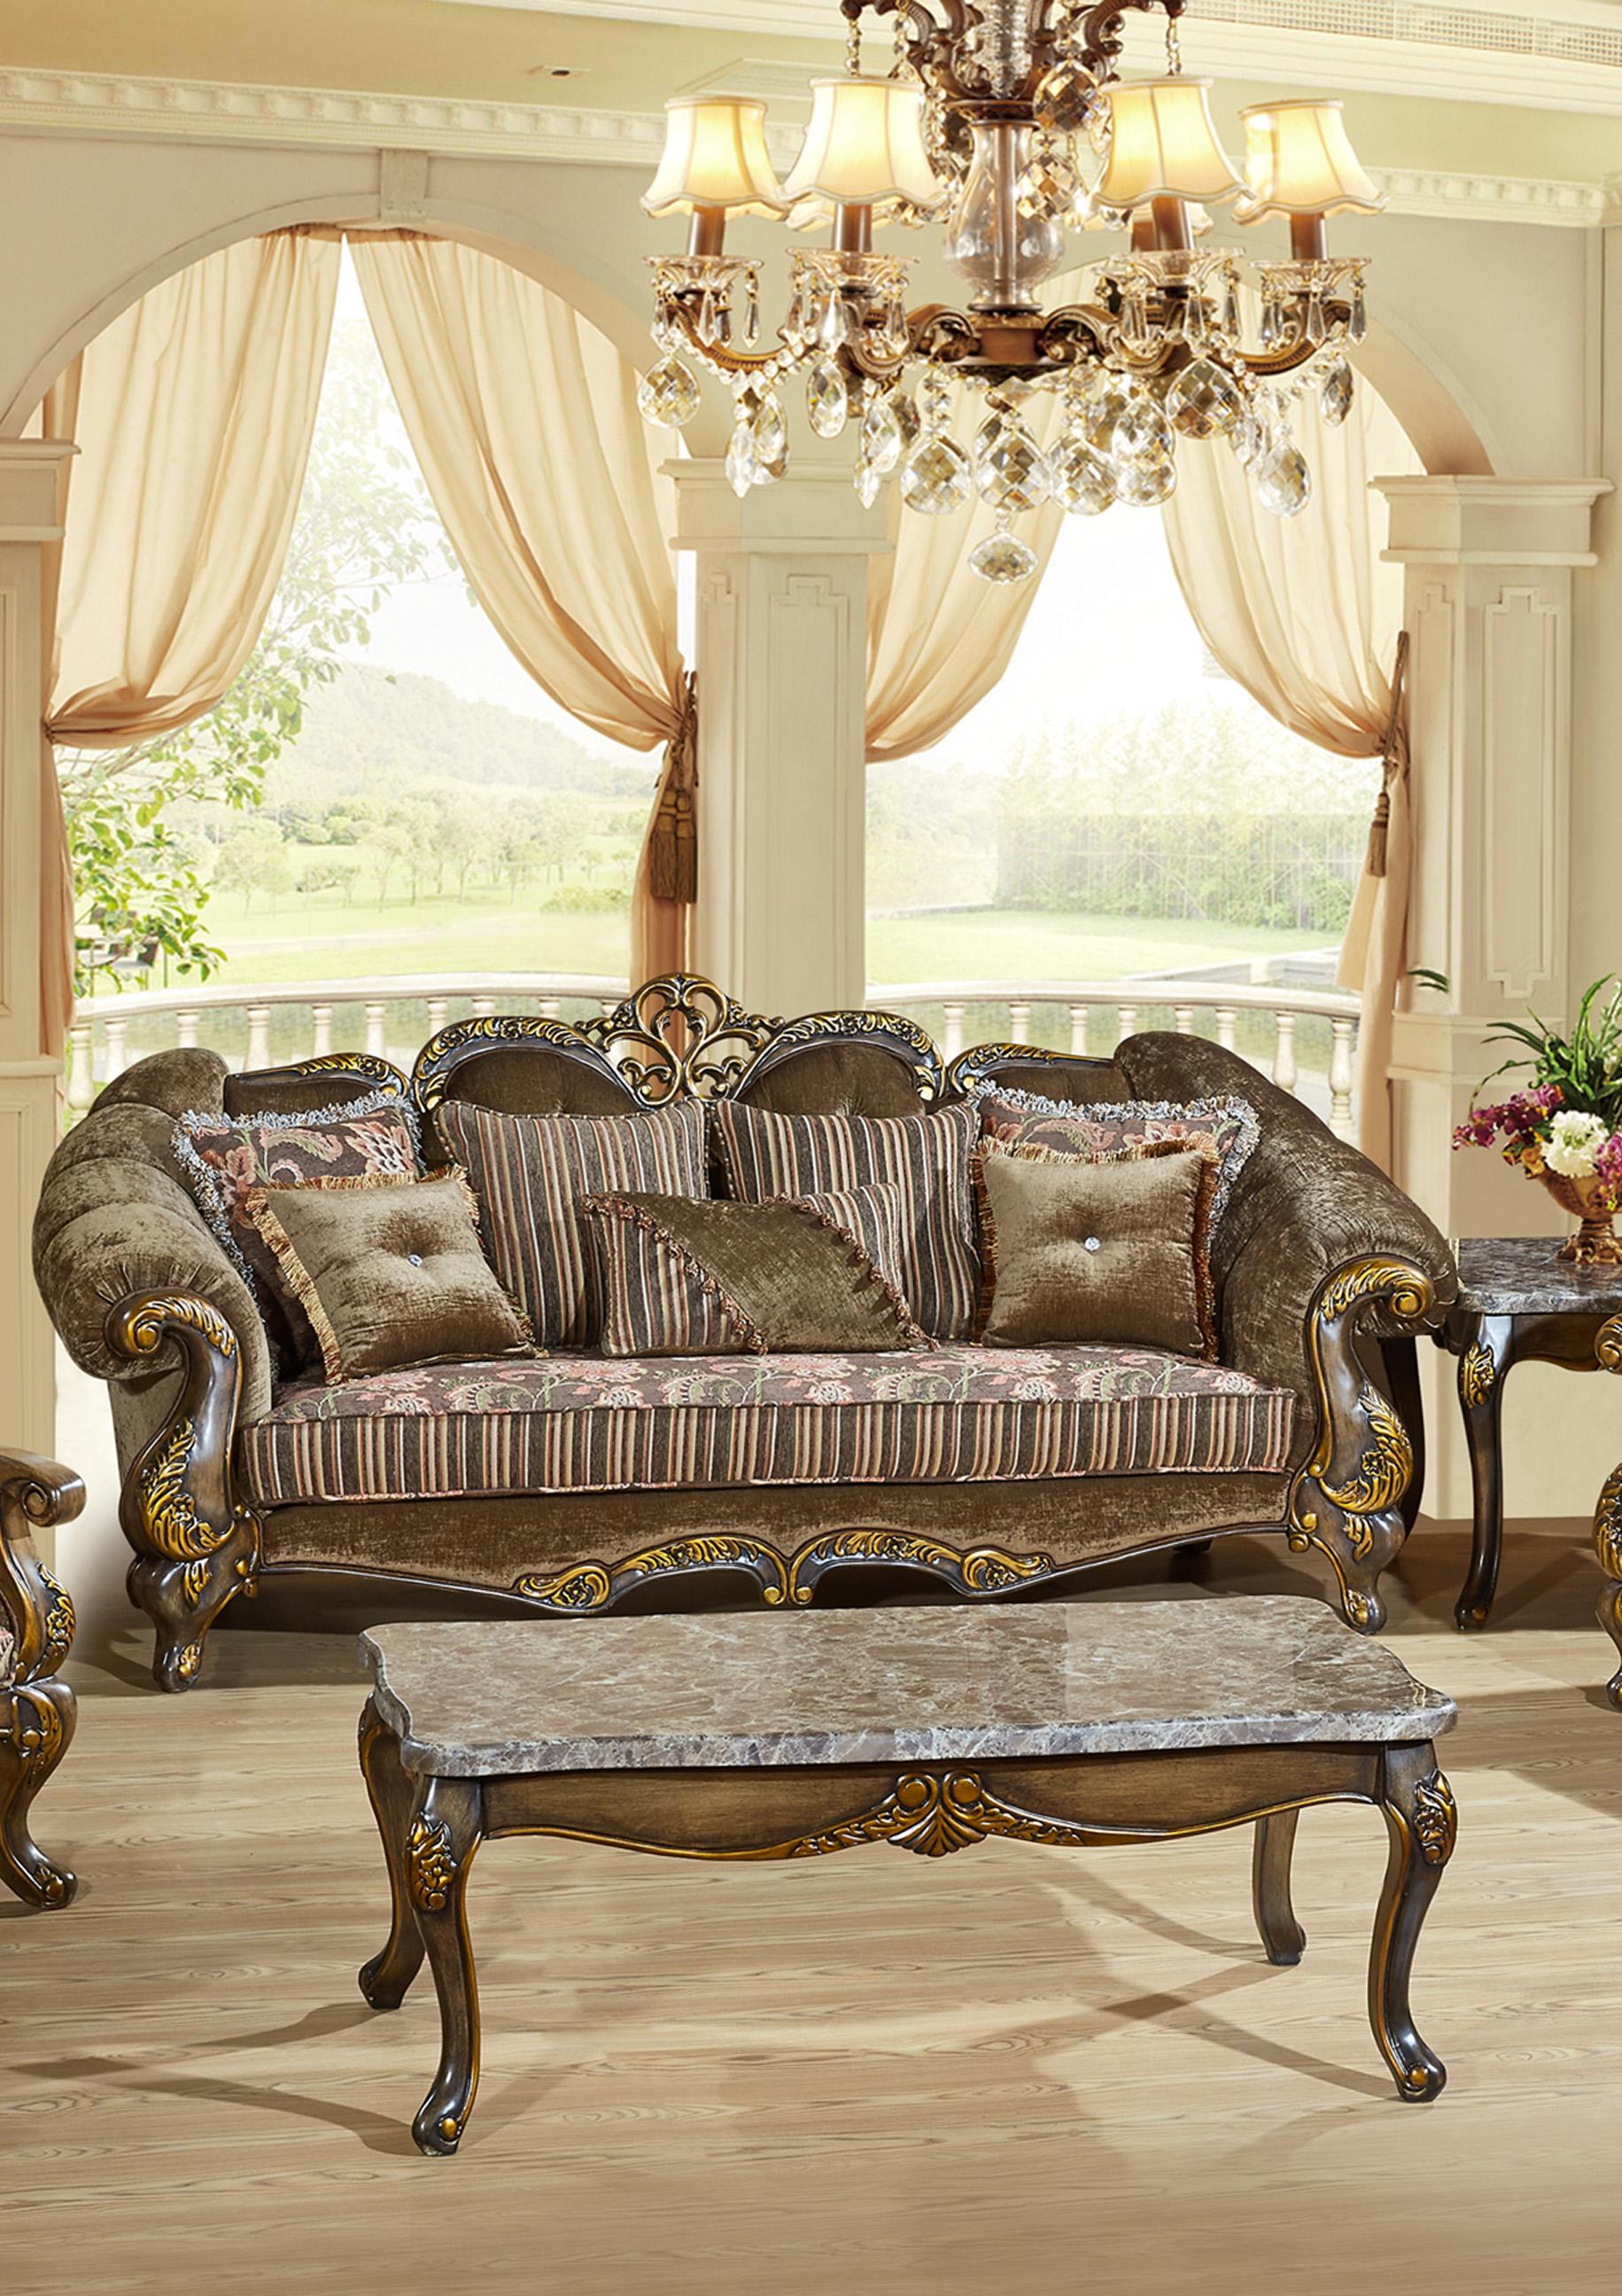 Meridian 656 Stefania Living Room Sofa Carved Wood Traditional Classic ...